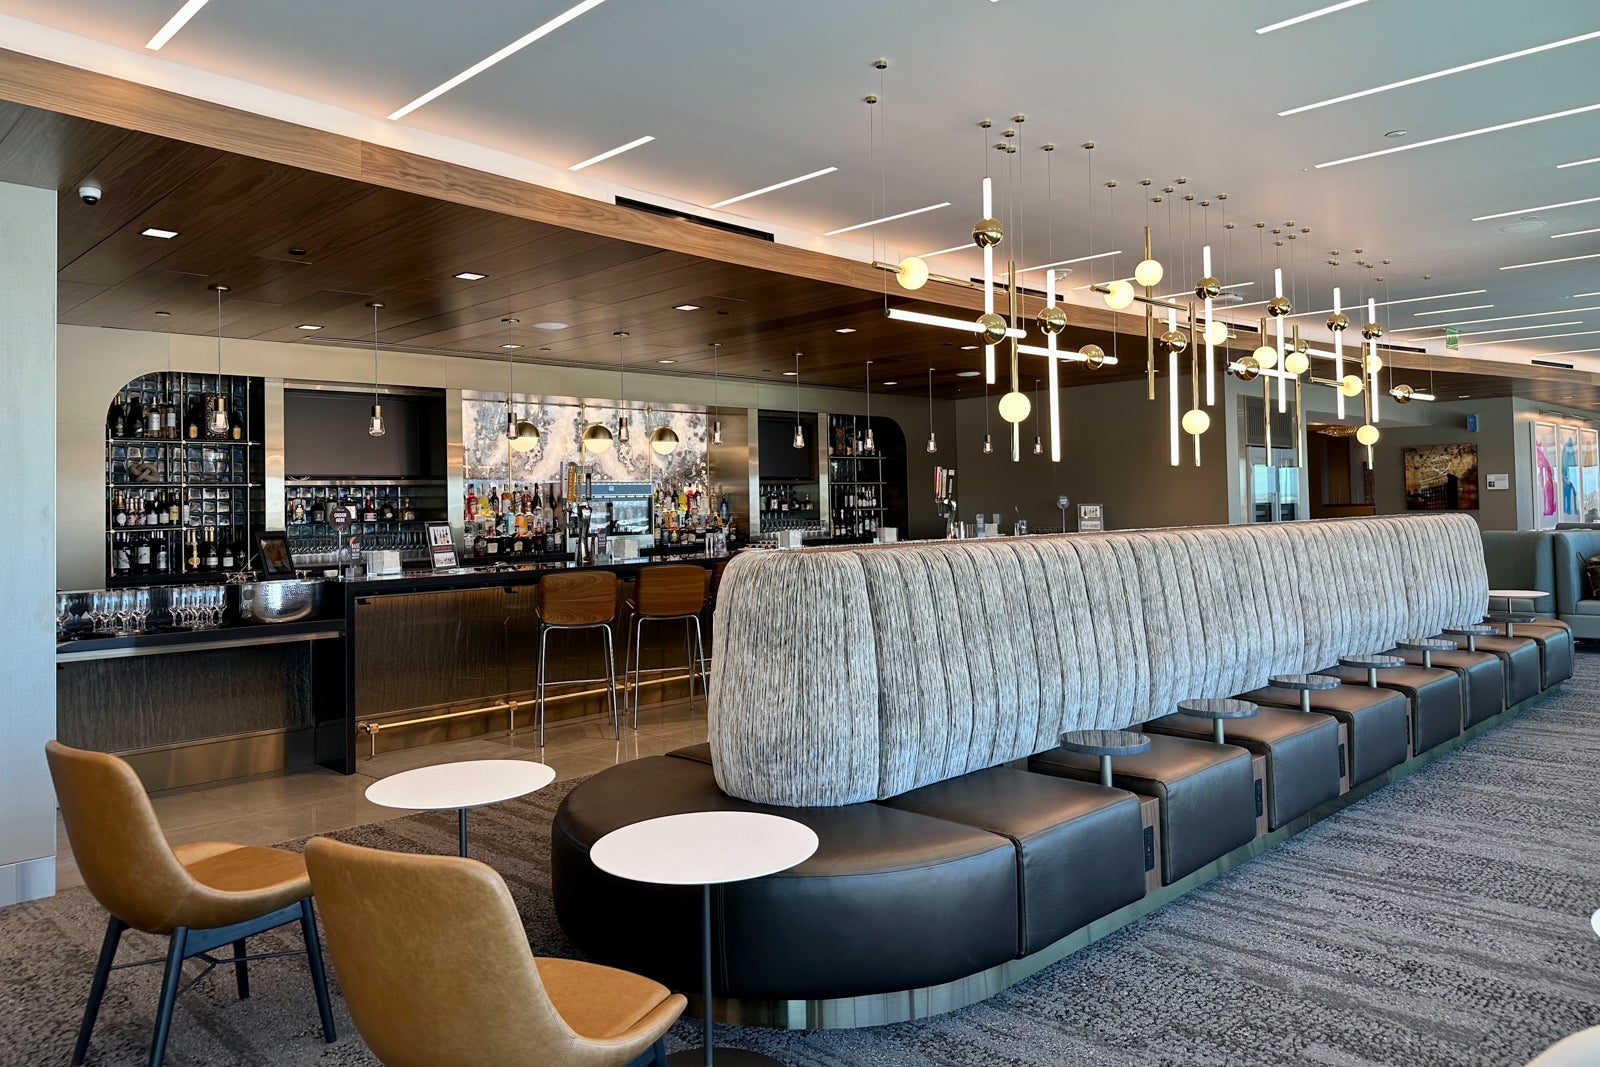 no passengers are visible in this large Delta airport lounge with lots of seating a huge full-service bar, the lounge is ready for grand opening